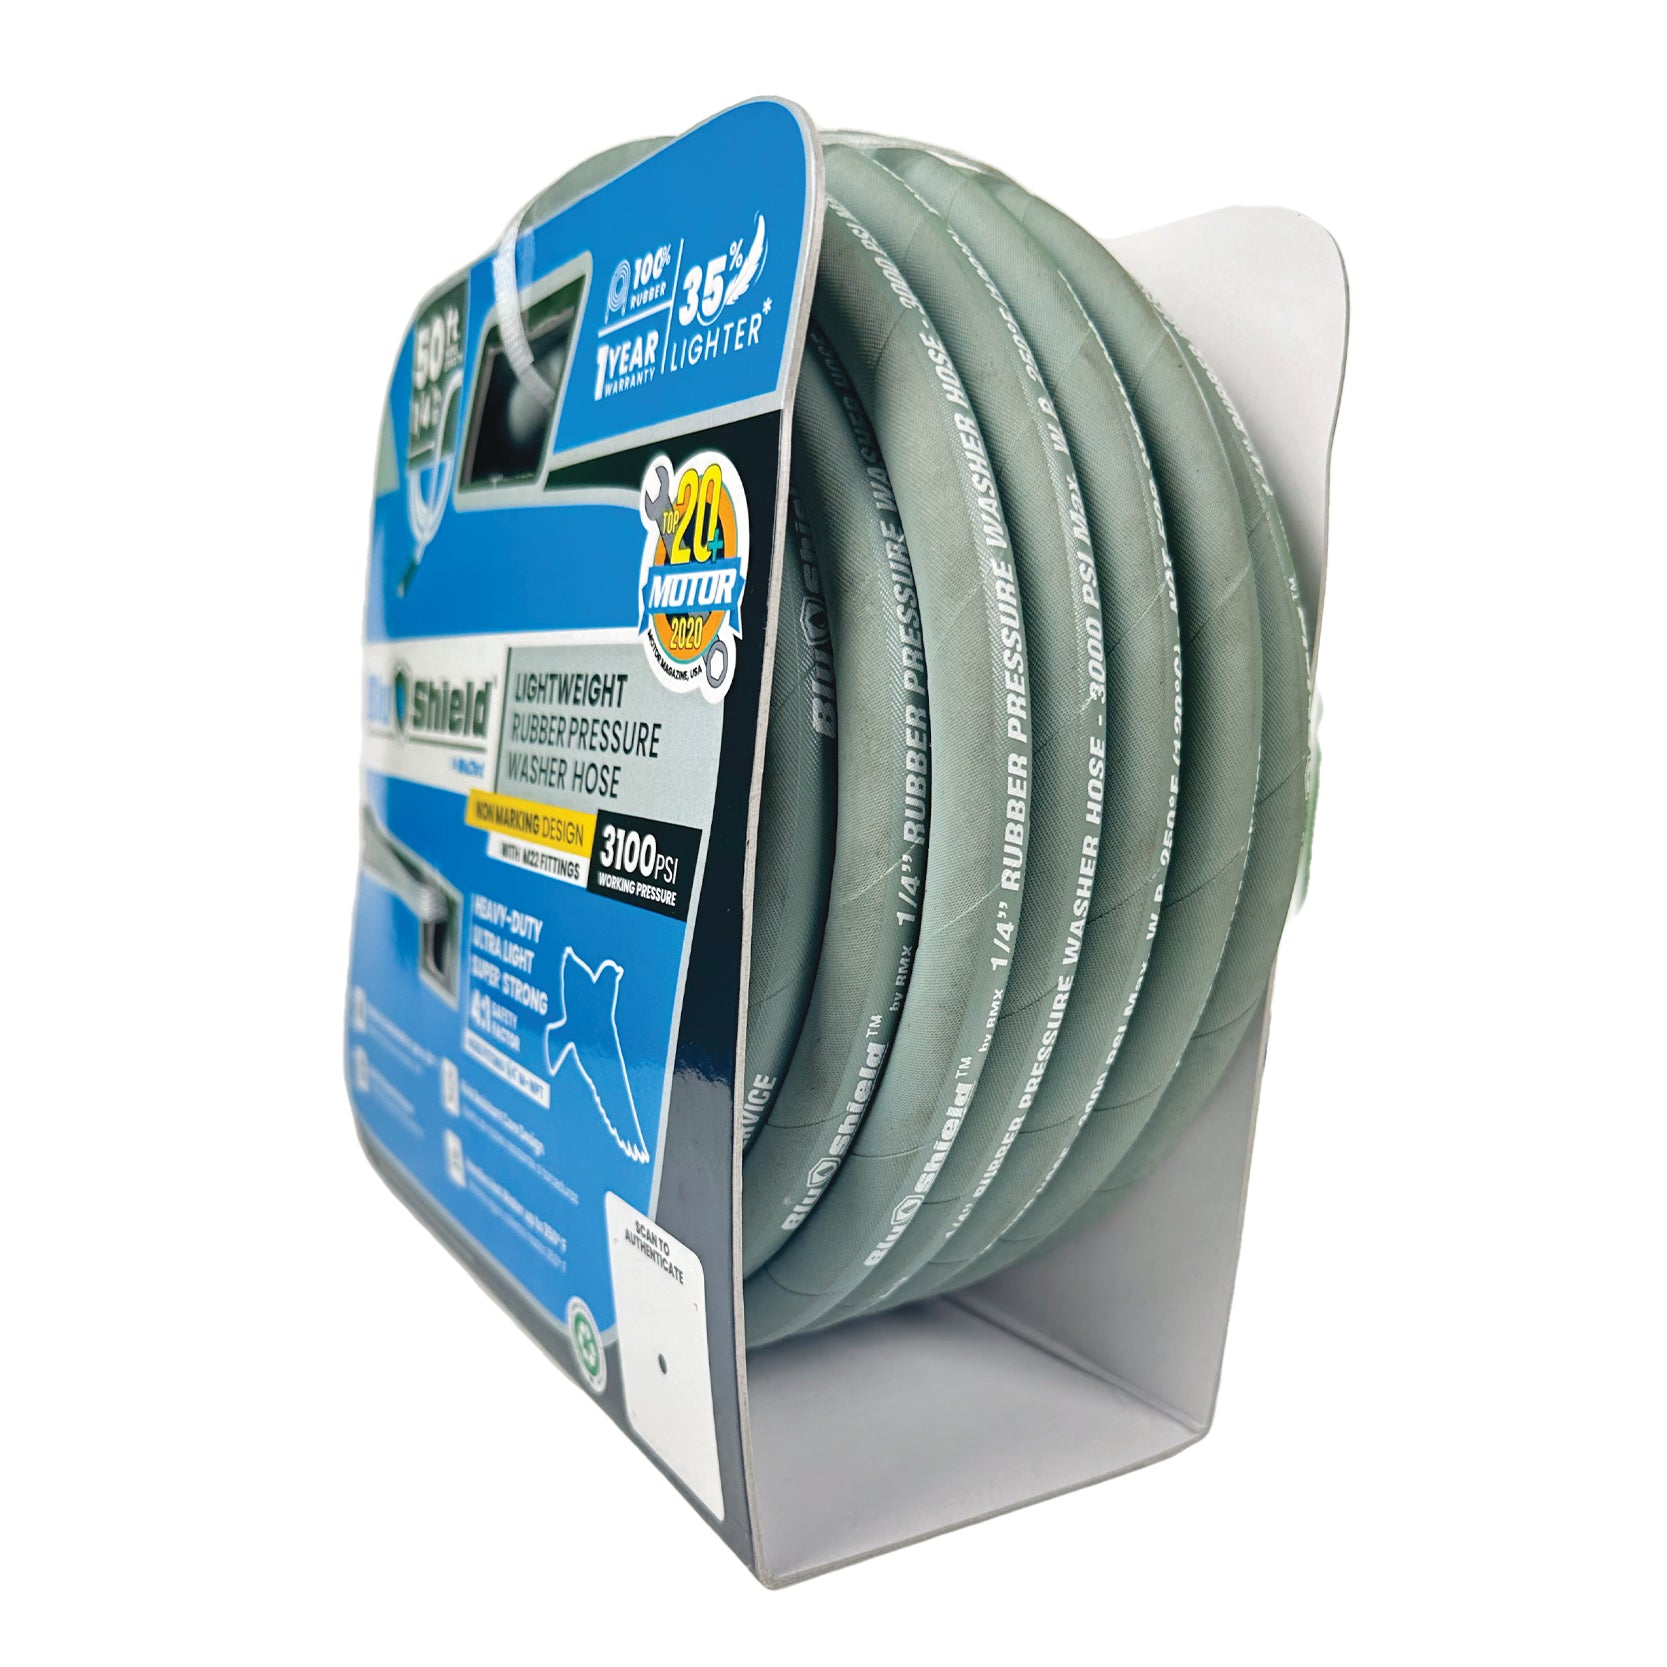 Blushield Pressure Washer Hose Non Marking 1/4" x 50' with M22